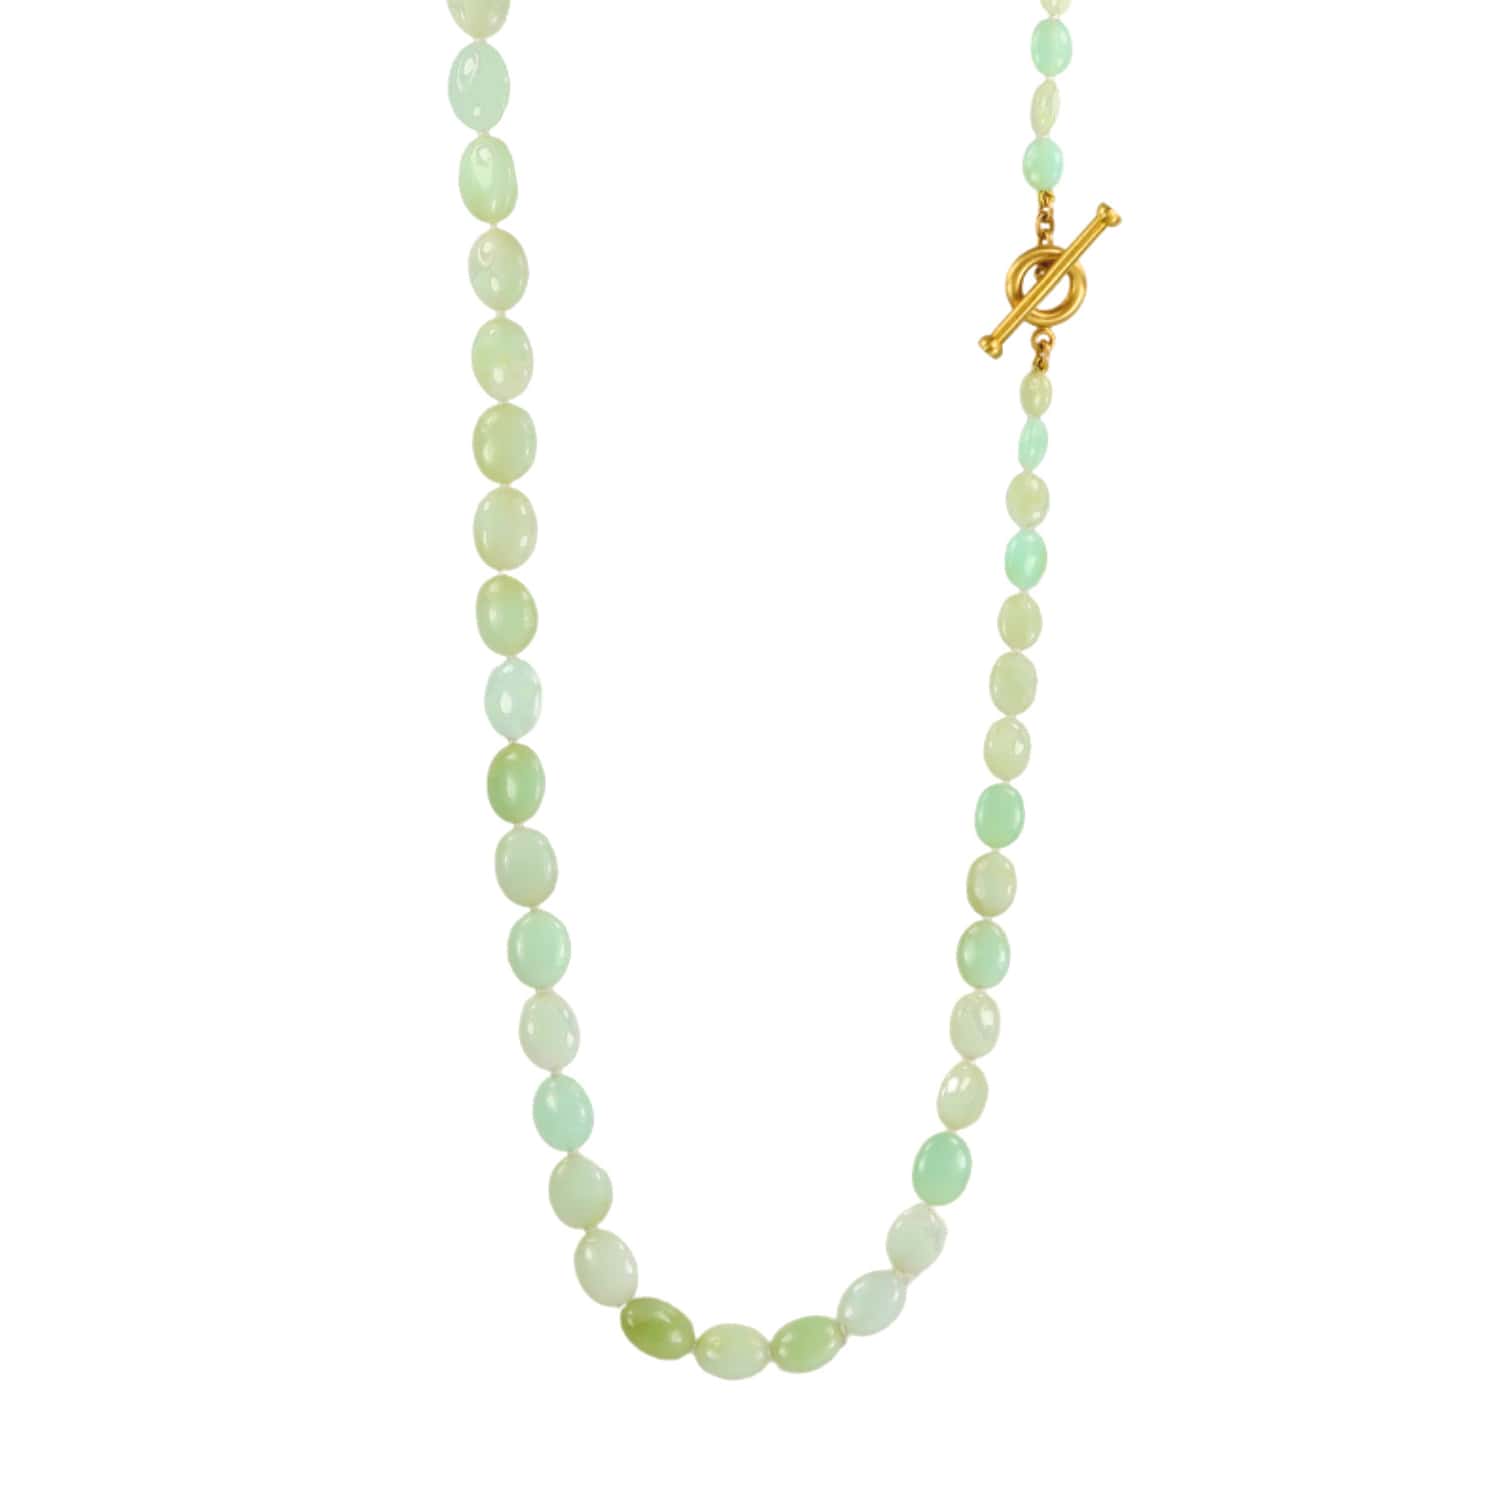 Smooth Oval Serbian Green Opal Beaded Necklace with 20K Gold Toggle Clasp - Peridot Fine Jewelry - Caroline Ellen